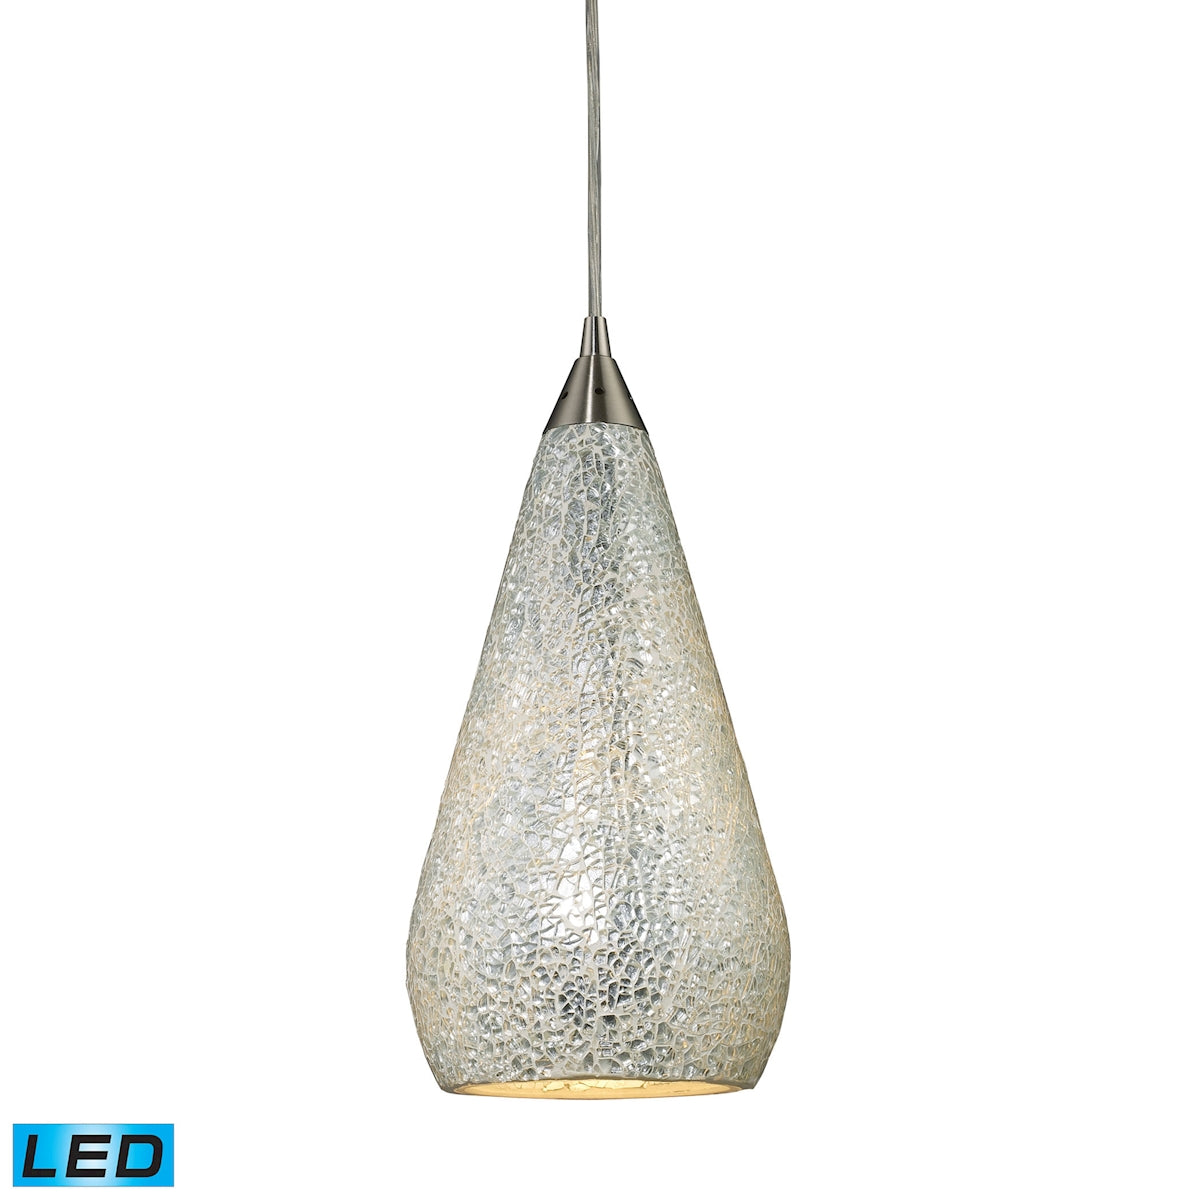 ELK Lighting 546-1SLV-CRC-LED Curvalo 1-Light Mini Pendant in Satin Nickel with Silver Crackle Glass - Includes LED Bulb